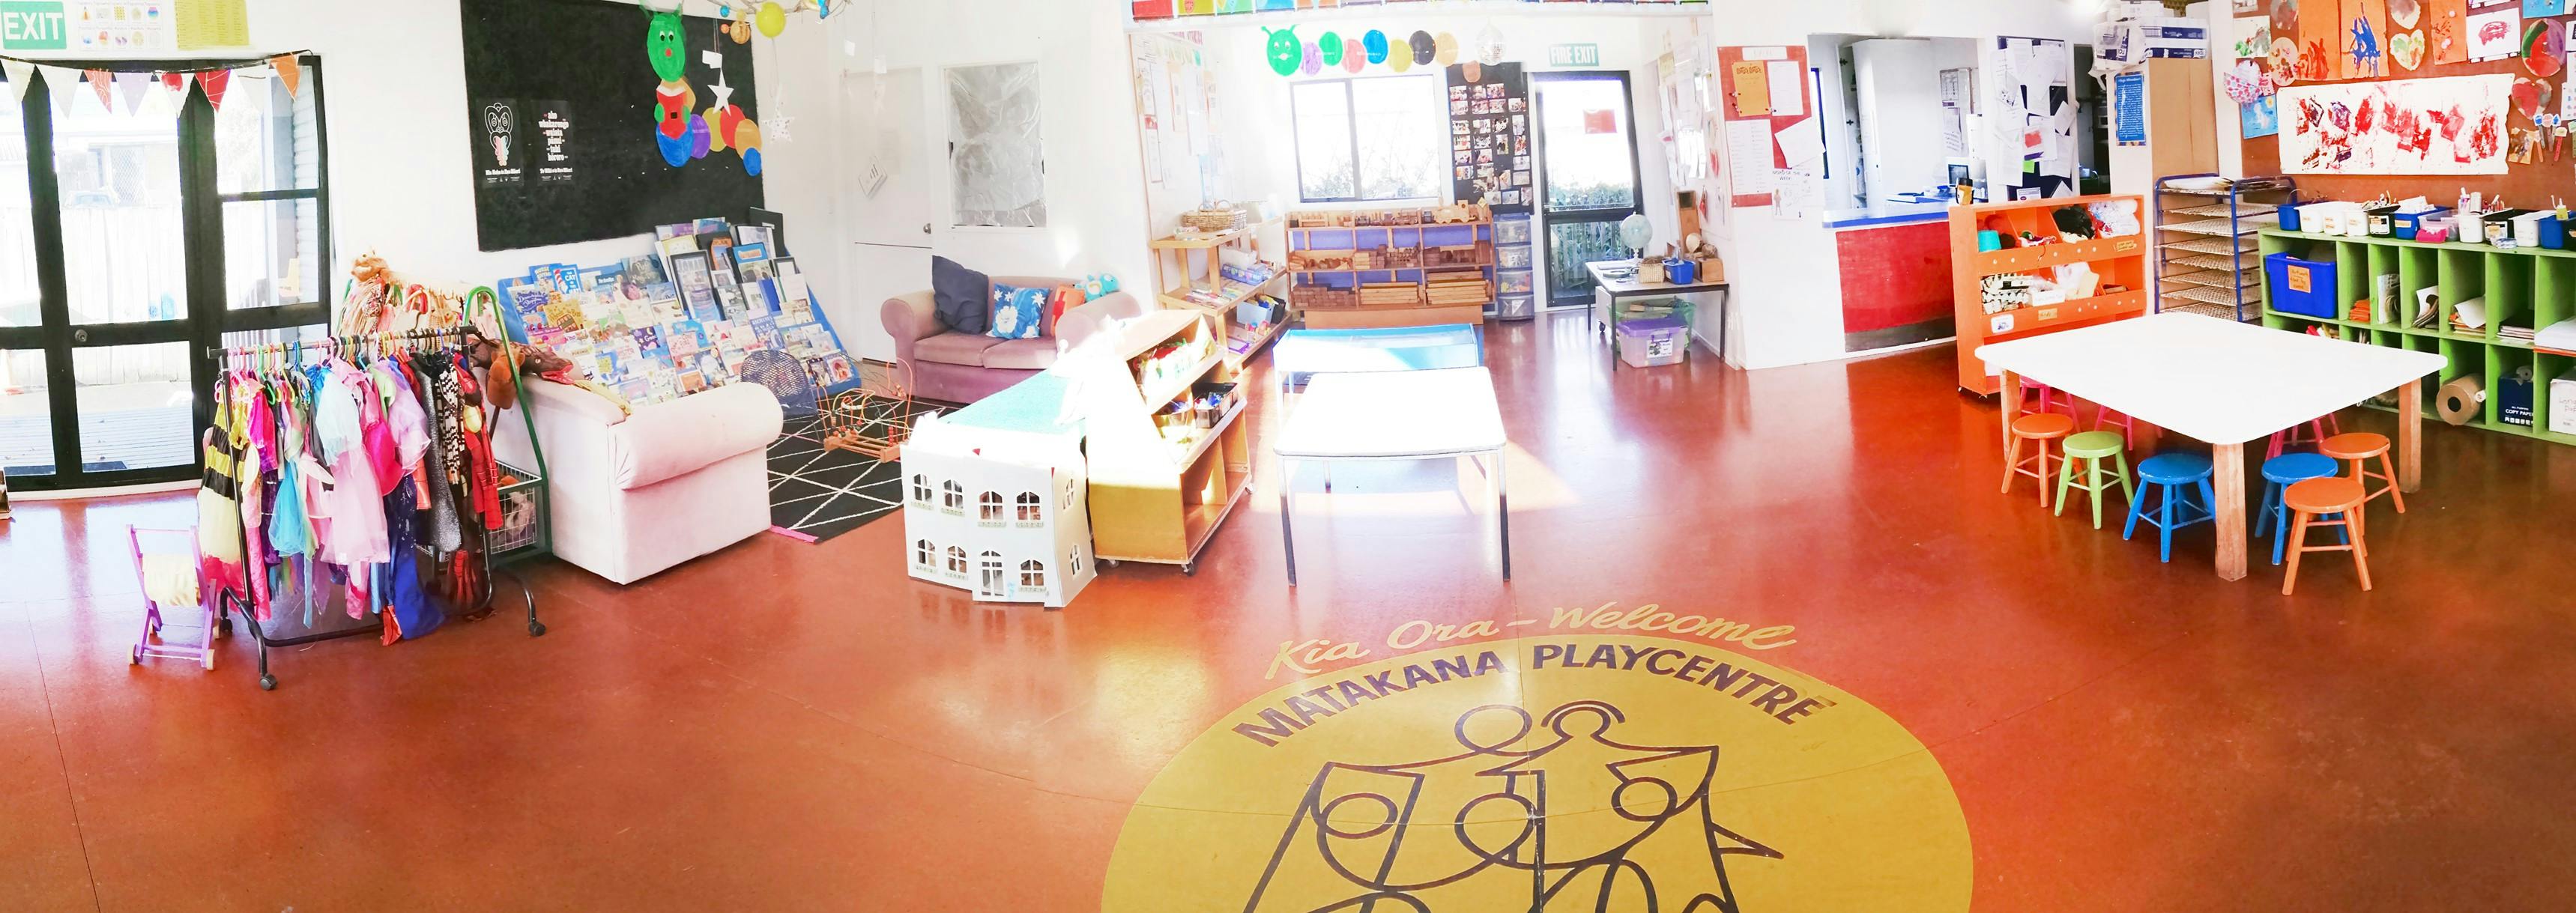 A picture of Matakana Playcentre